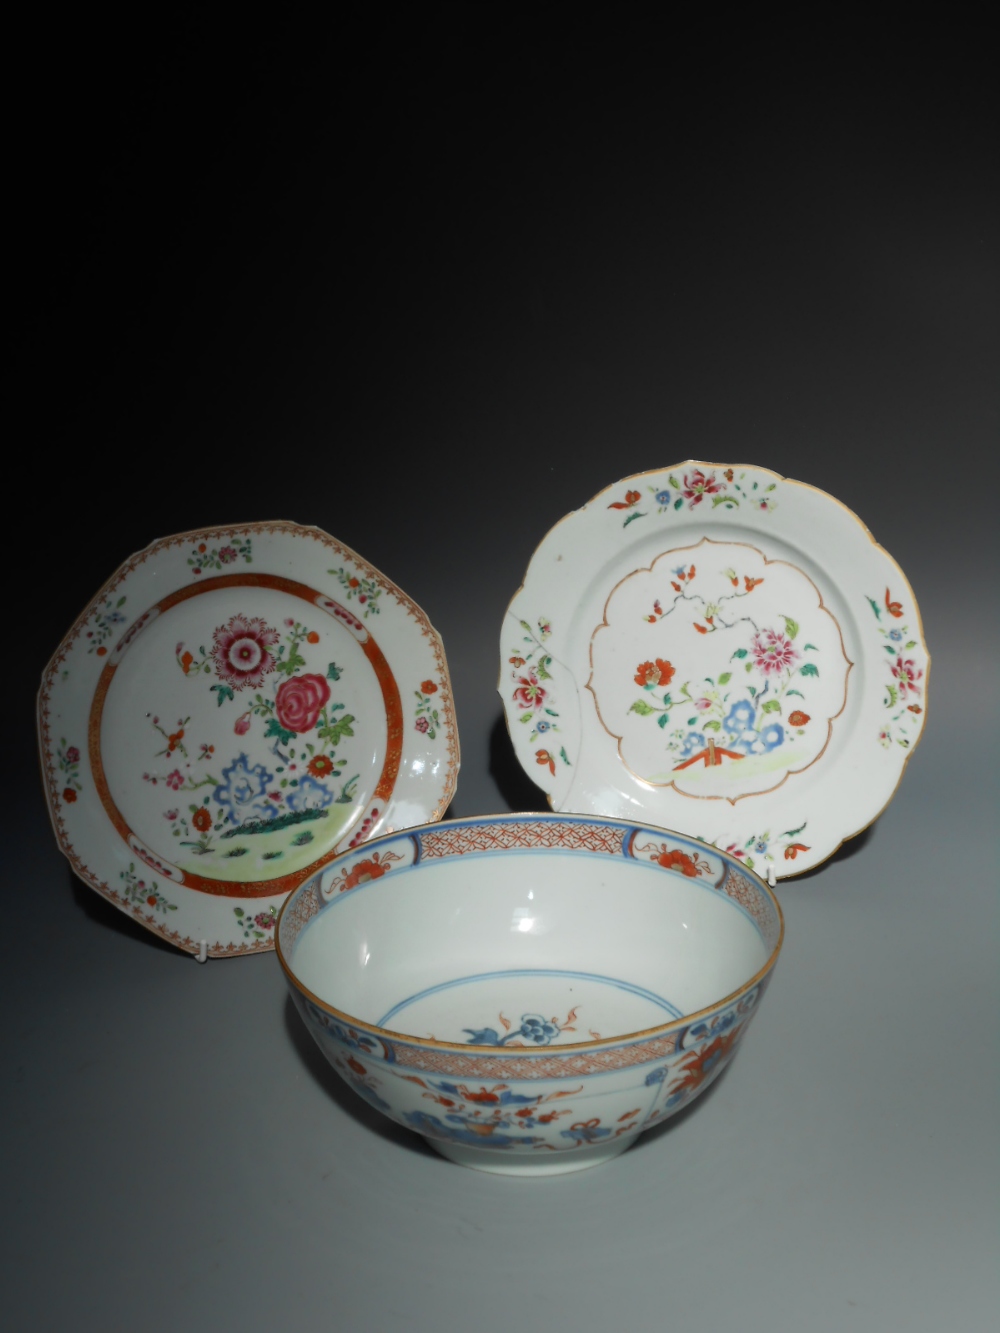 TWO CHINESE FAMILLE ROSE PLATES, Qing, 9"" dia.; and a Chinese Imari bowl, Qing, 9"" dia. (3)